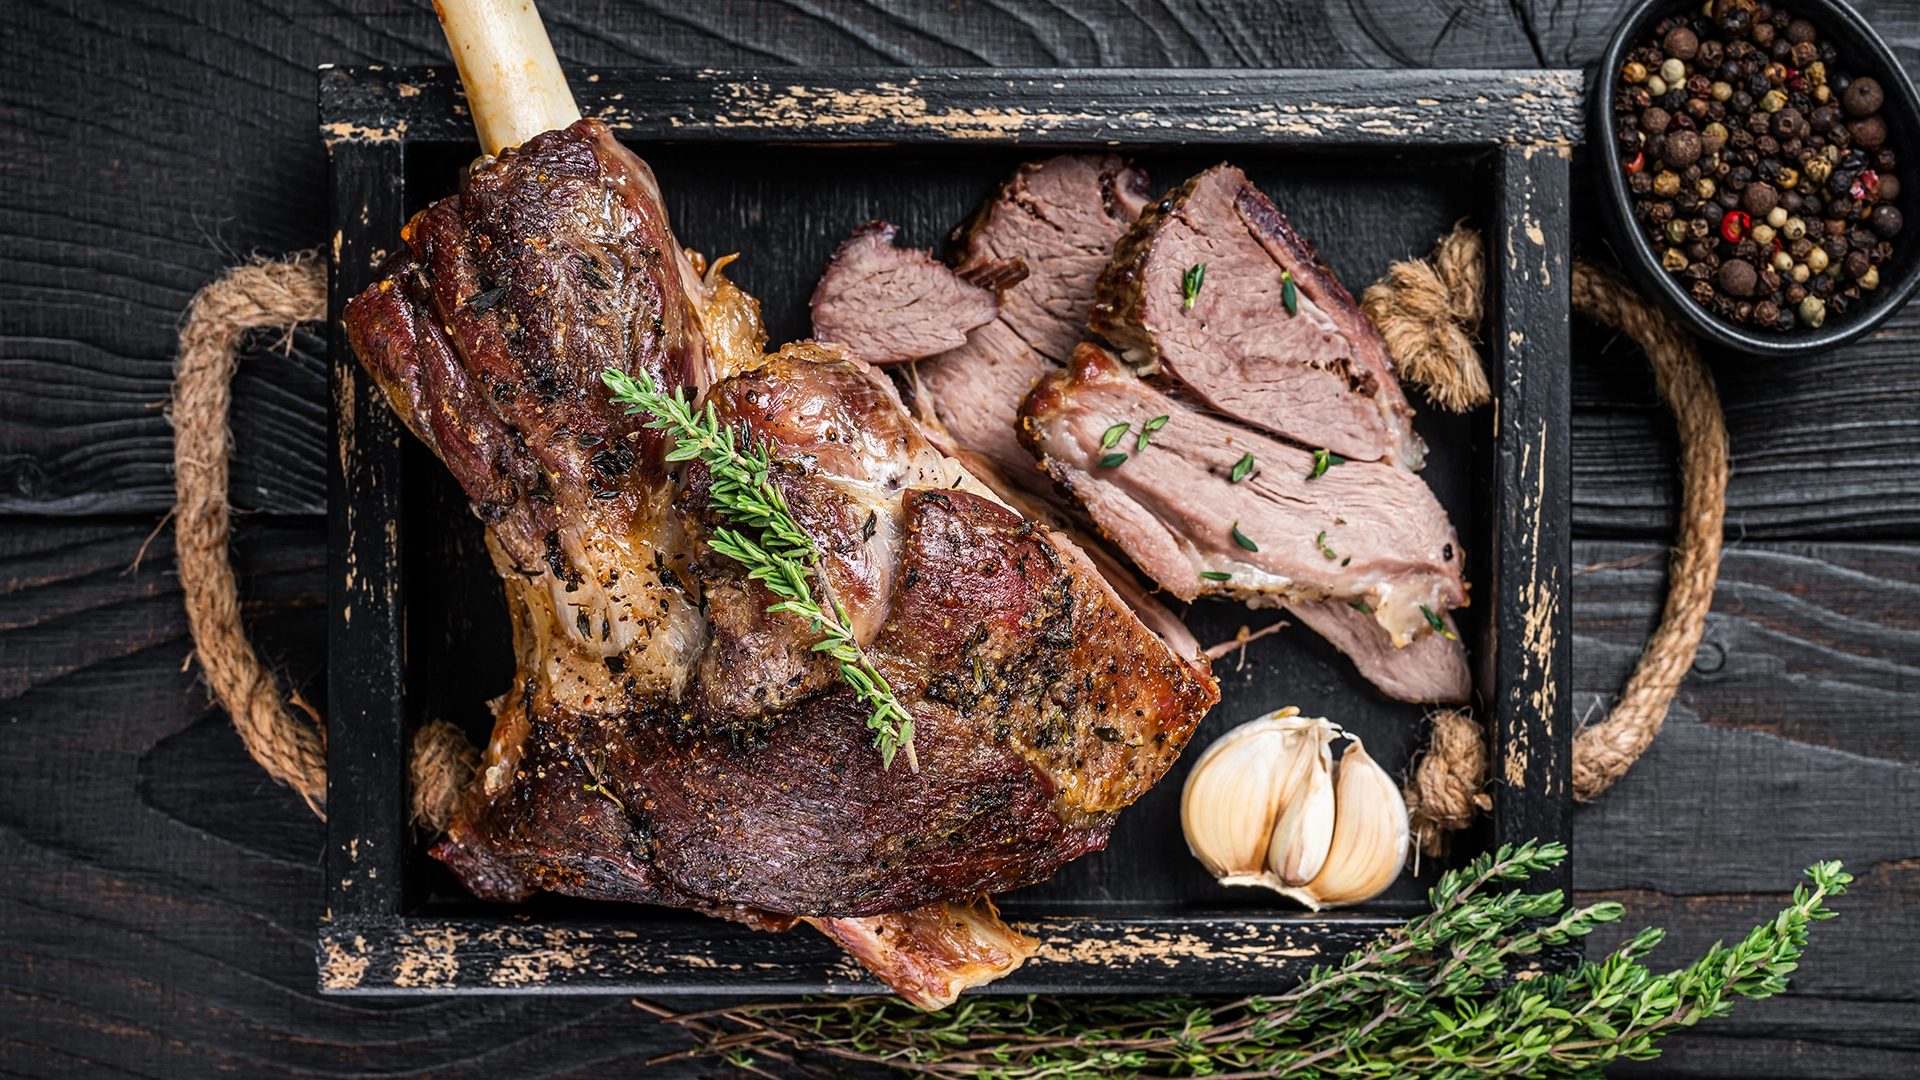 How to Roast Lamb in the Smoker